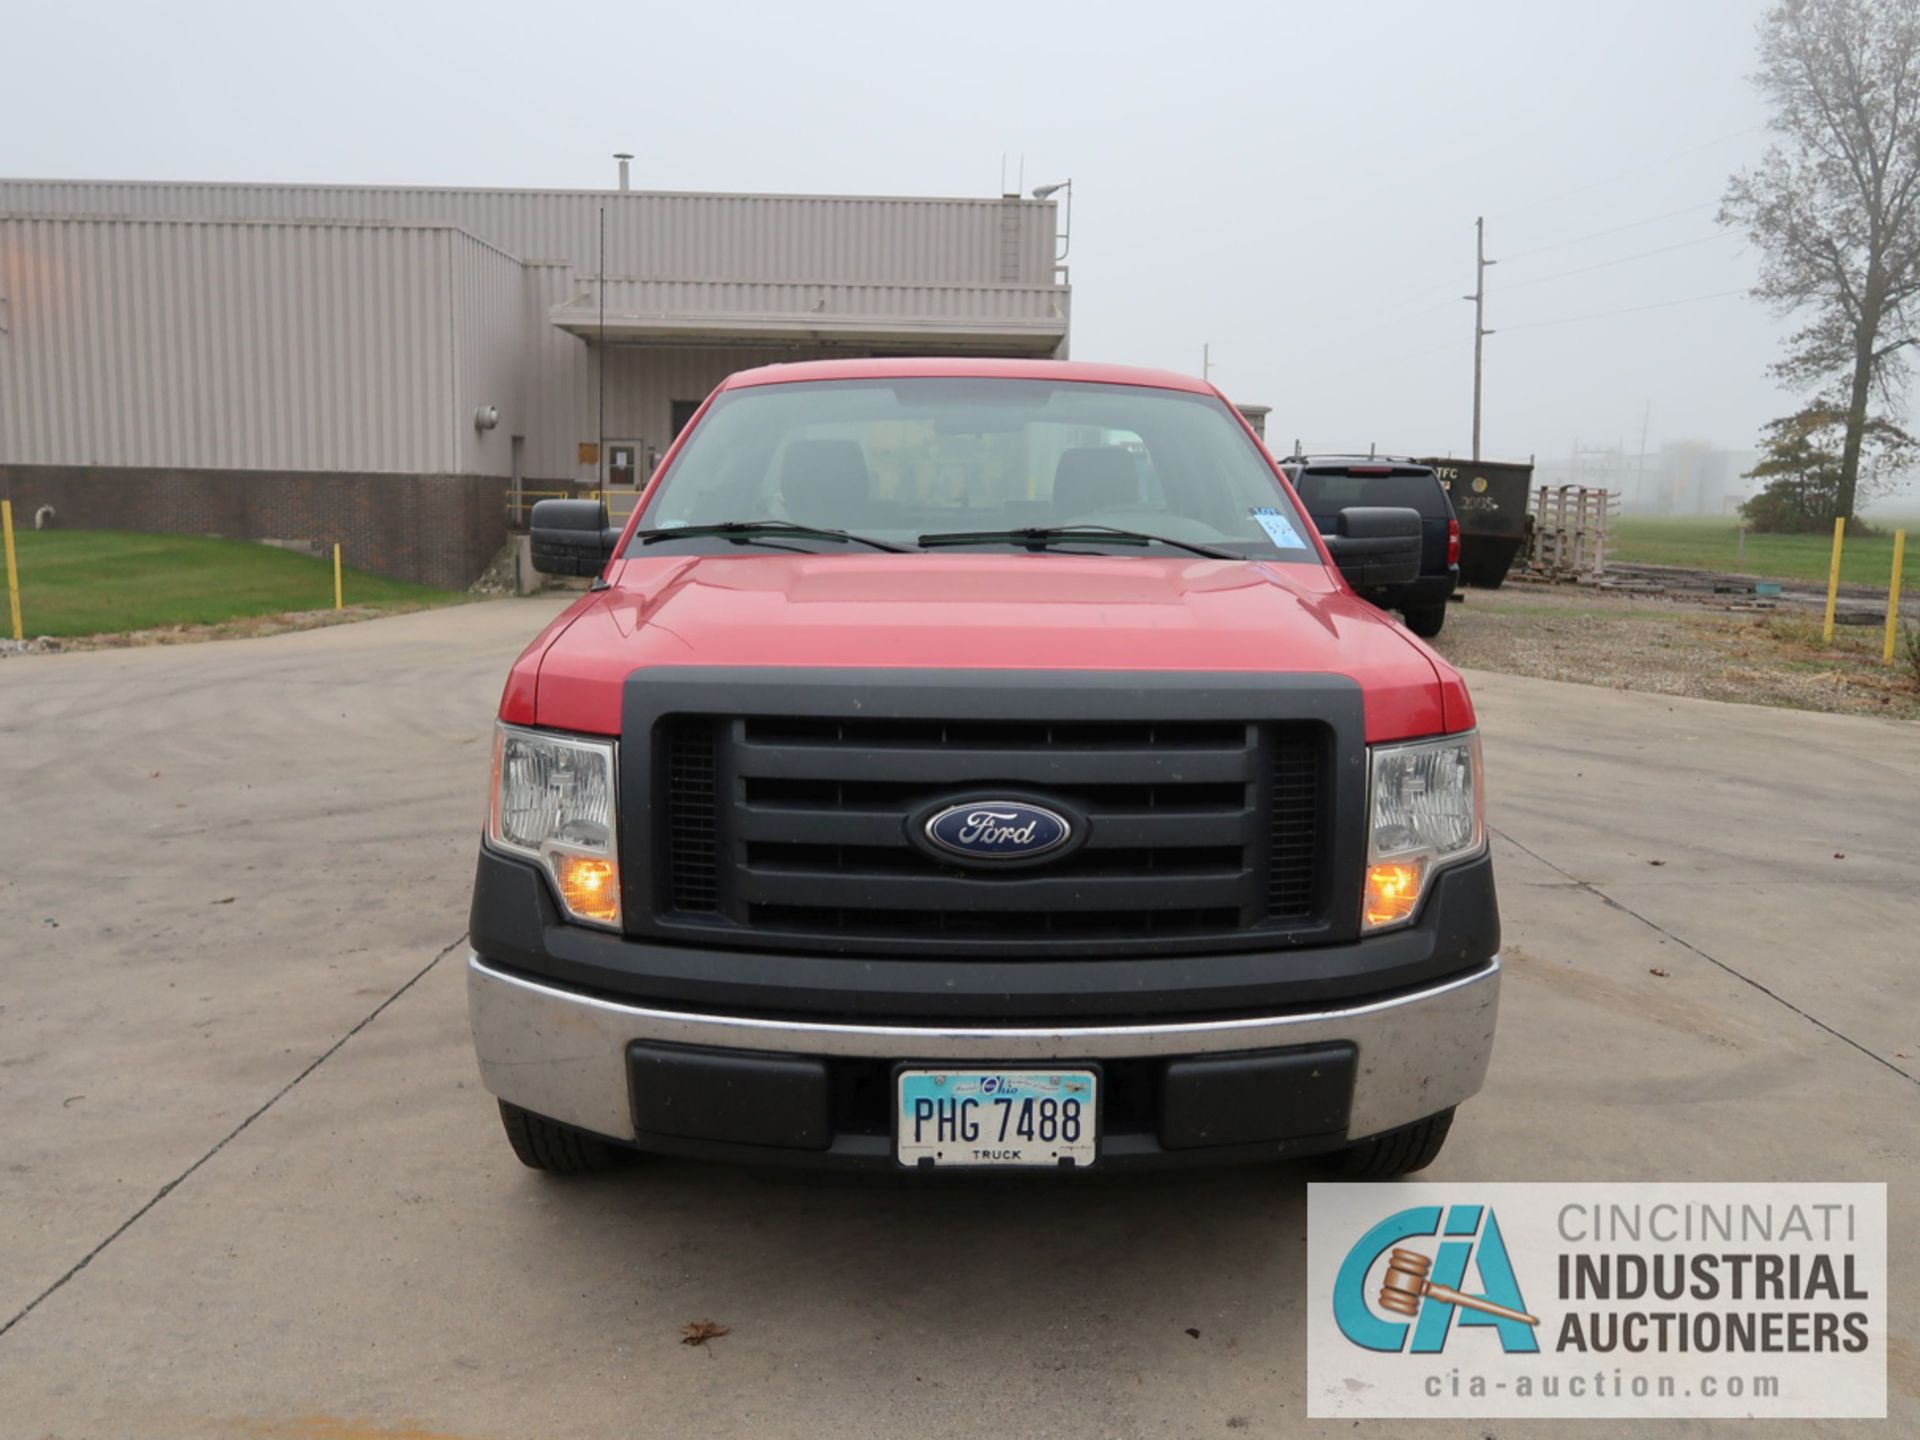 2010 FORD F-150 PICK UP TRUCK; VIN # 1FTMF1CW3AKE02719, 4.62 TRITON GAS ENGINE, AUTOMATIC - Image 2 of 12